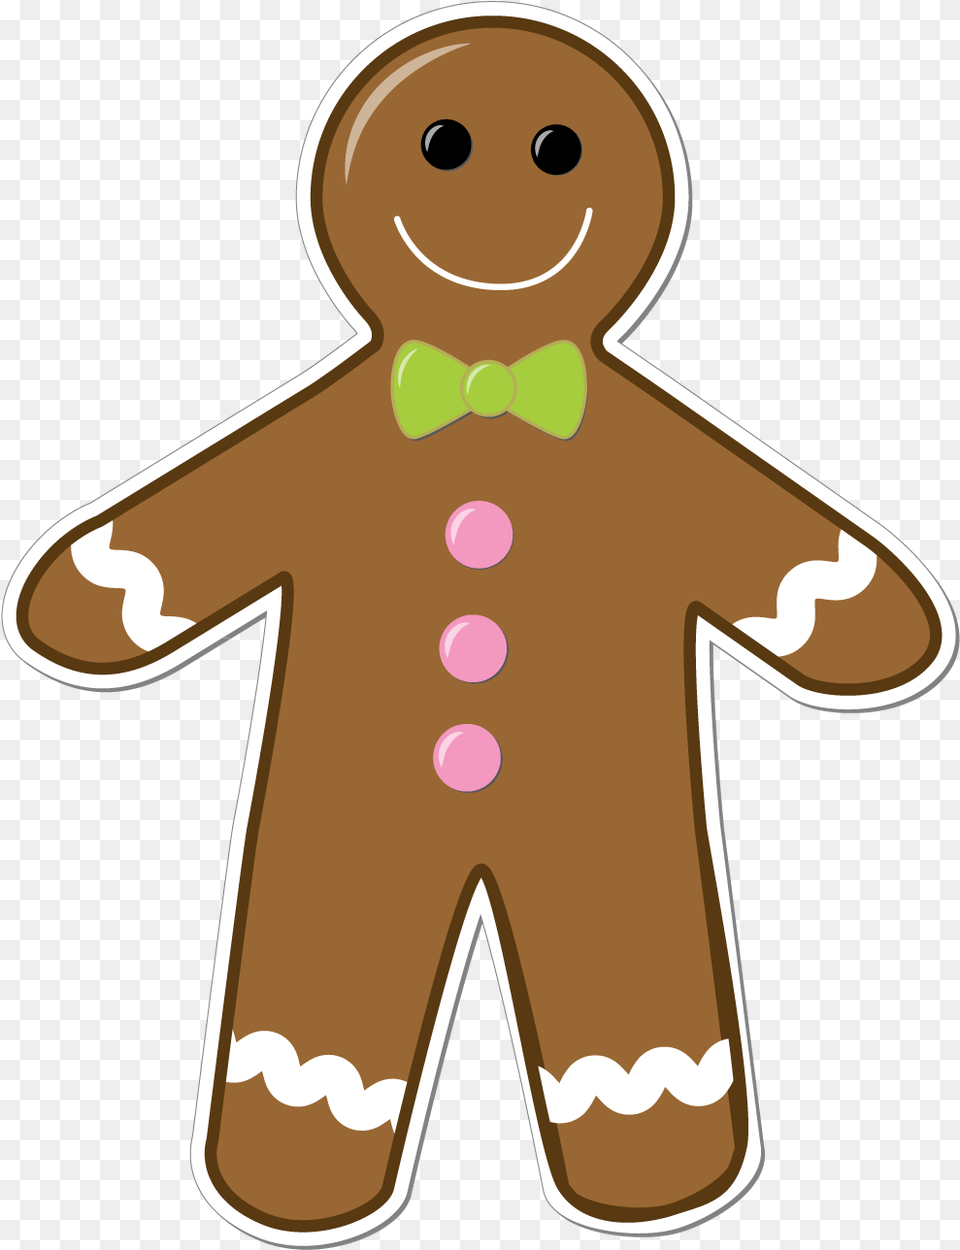 Displaying 18 Images For Gingerbread Man Border Background Gingerbread Man Clipart, Cookie, Food, Sweets, Cross Free Transparent Png